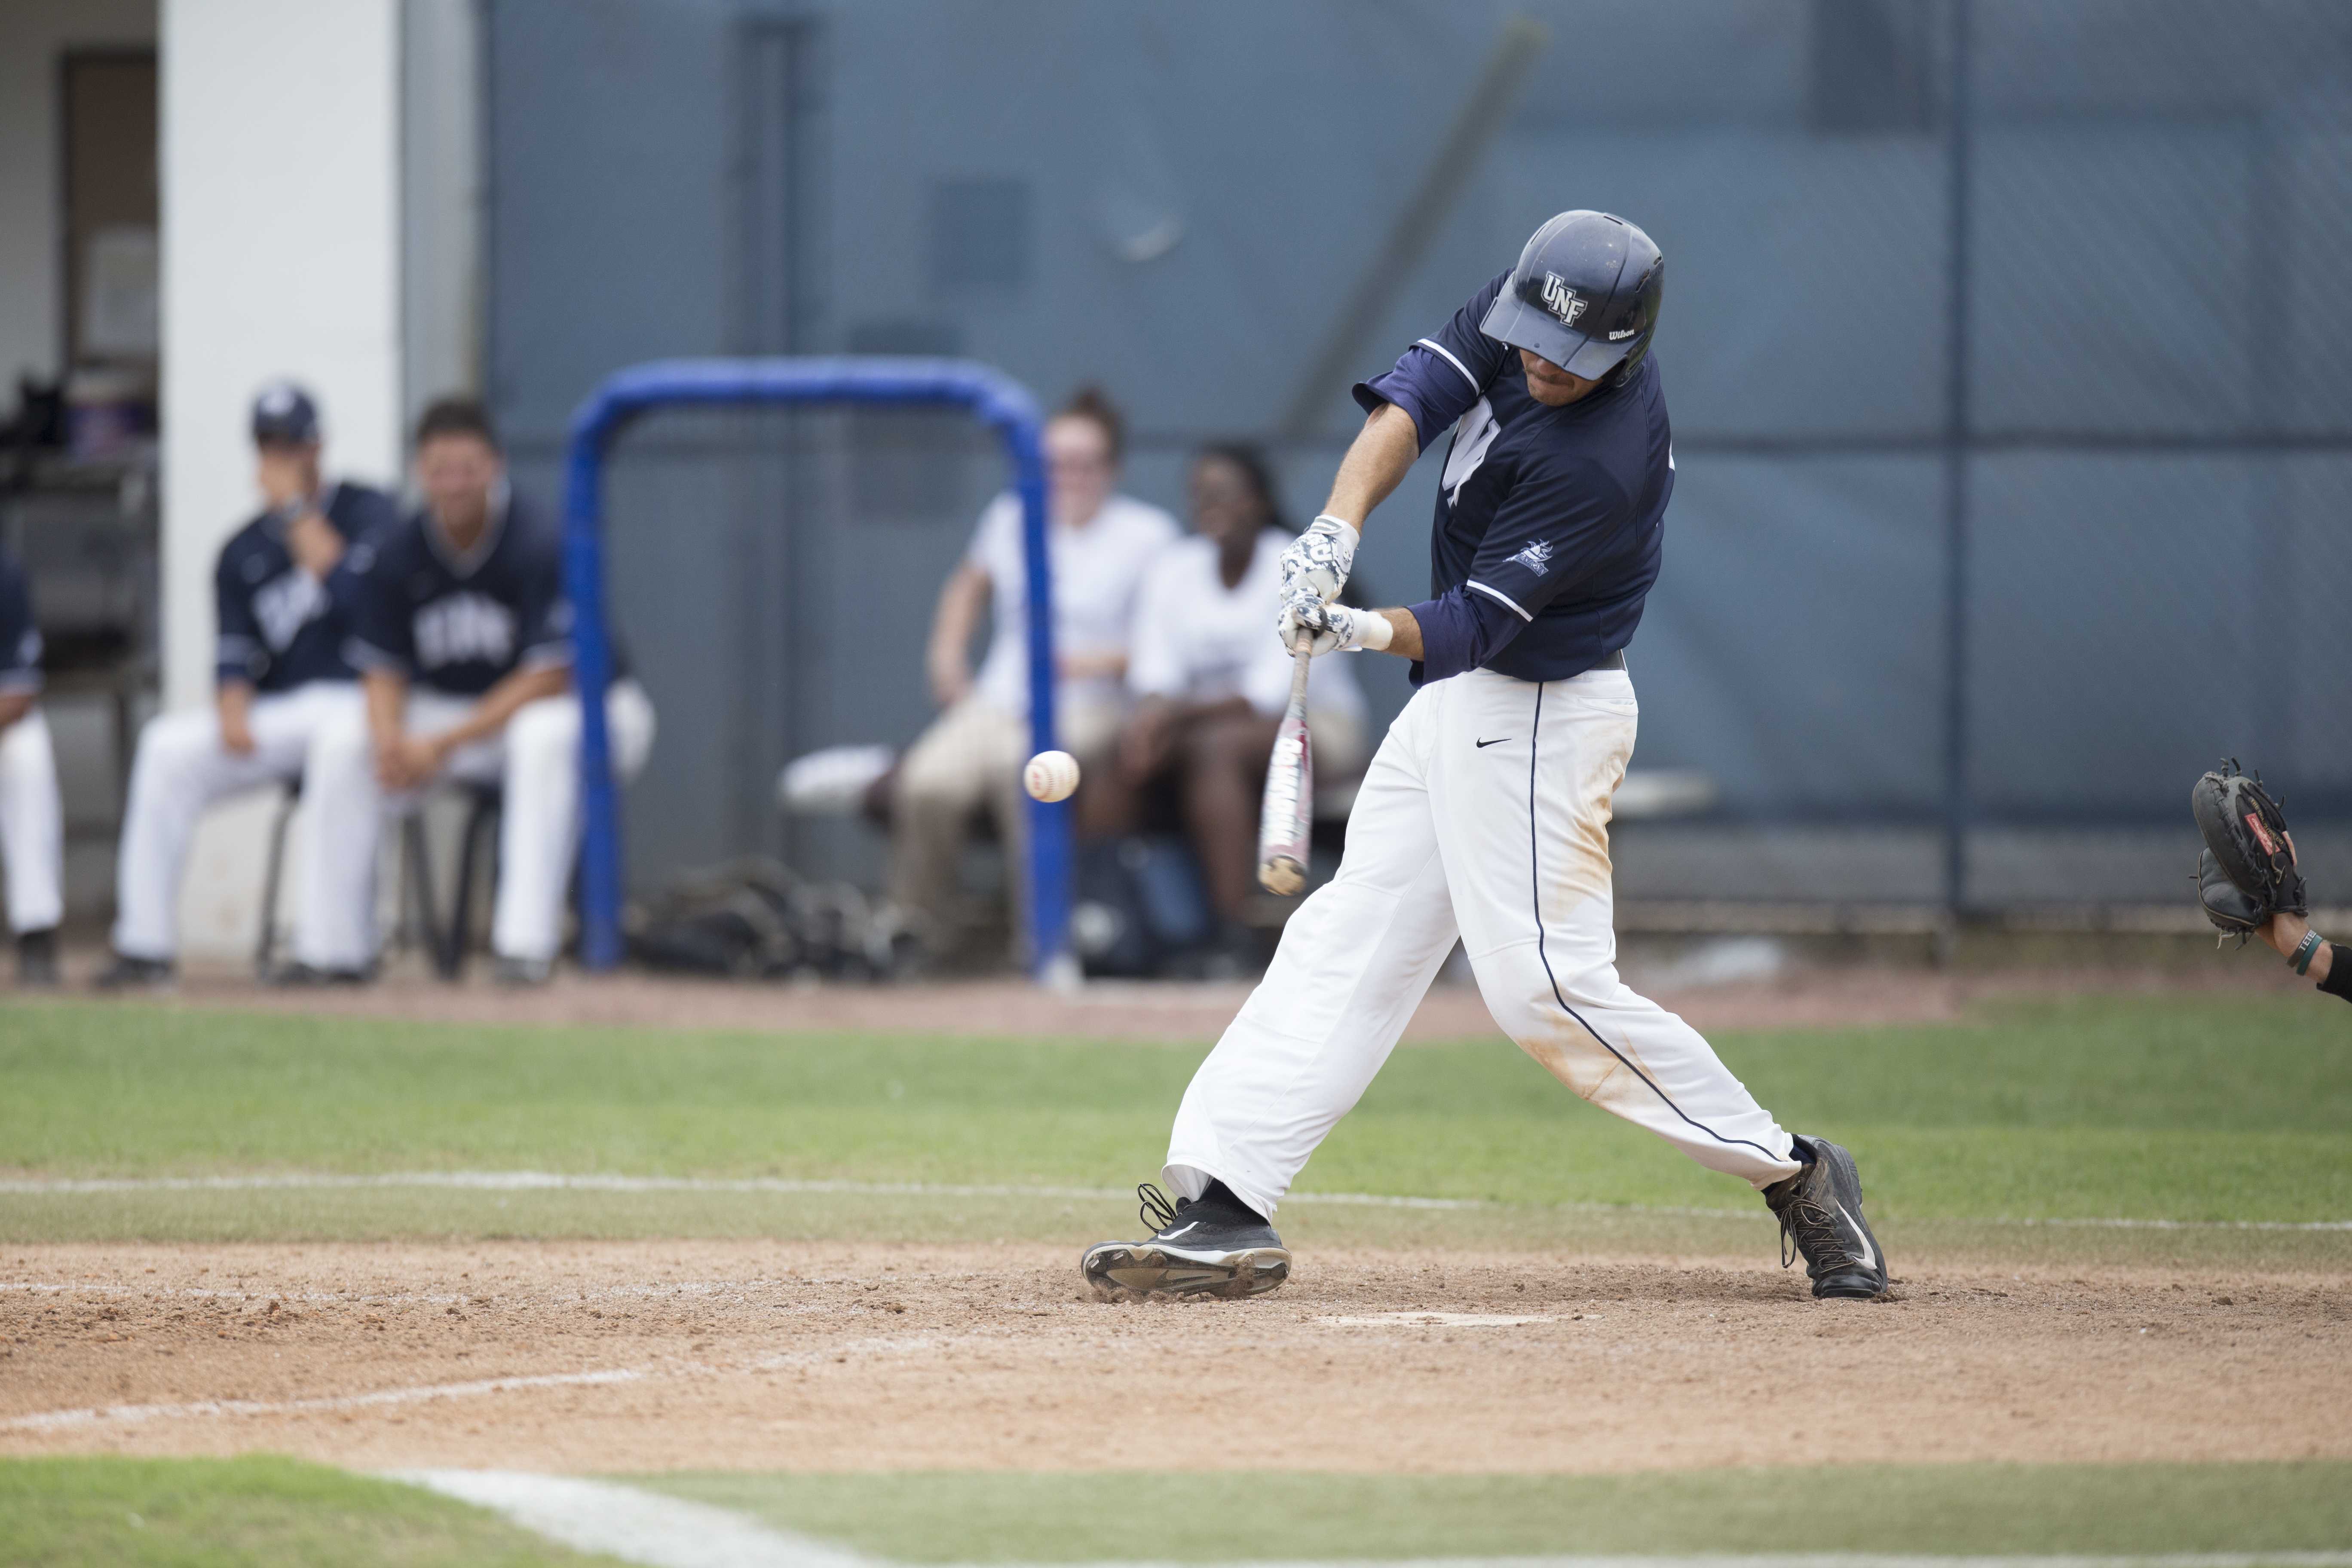 Late-inning heroics have become a nightly occurrence for the Ospreys. Photo by Morgan Purvis